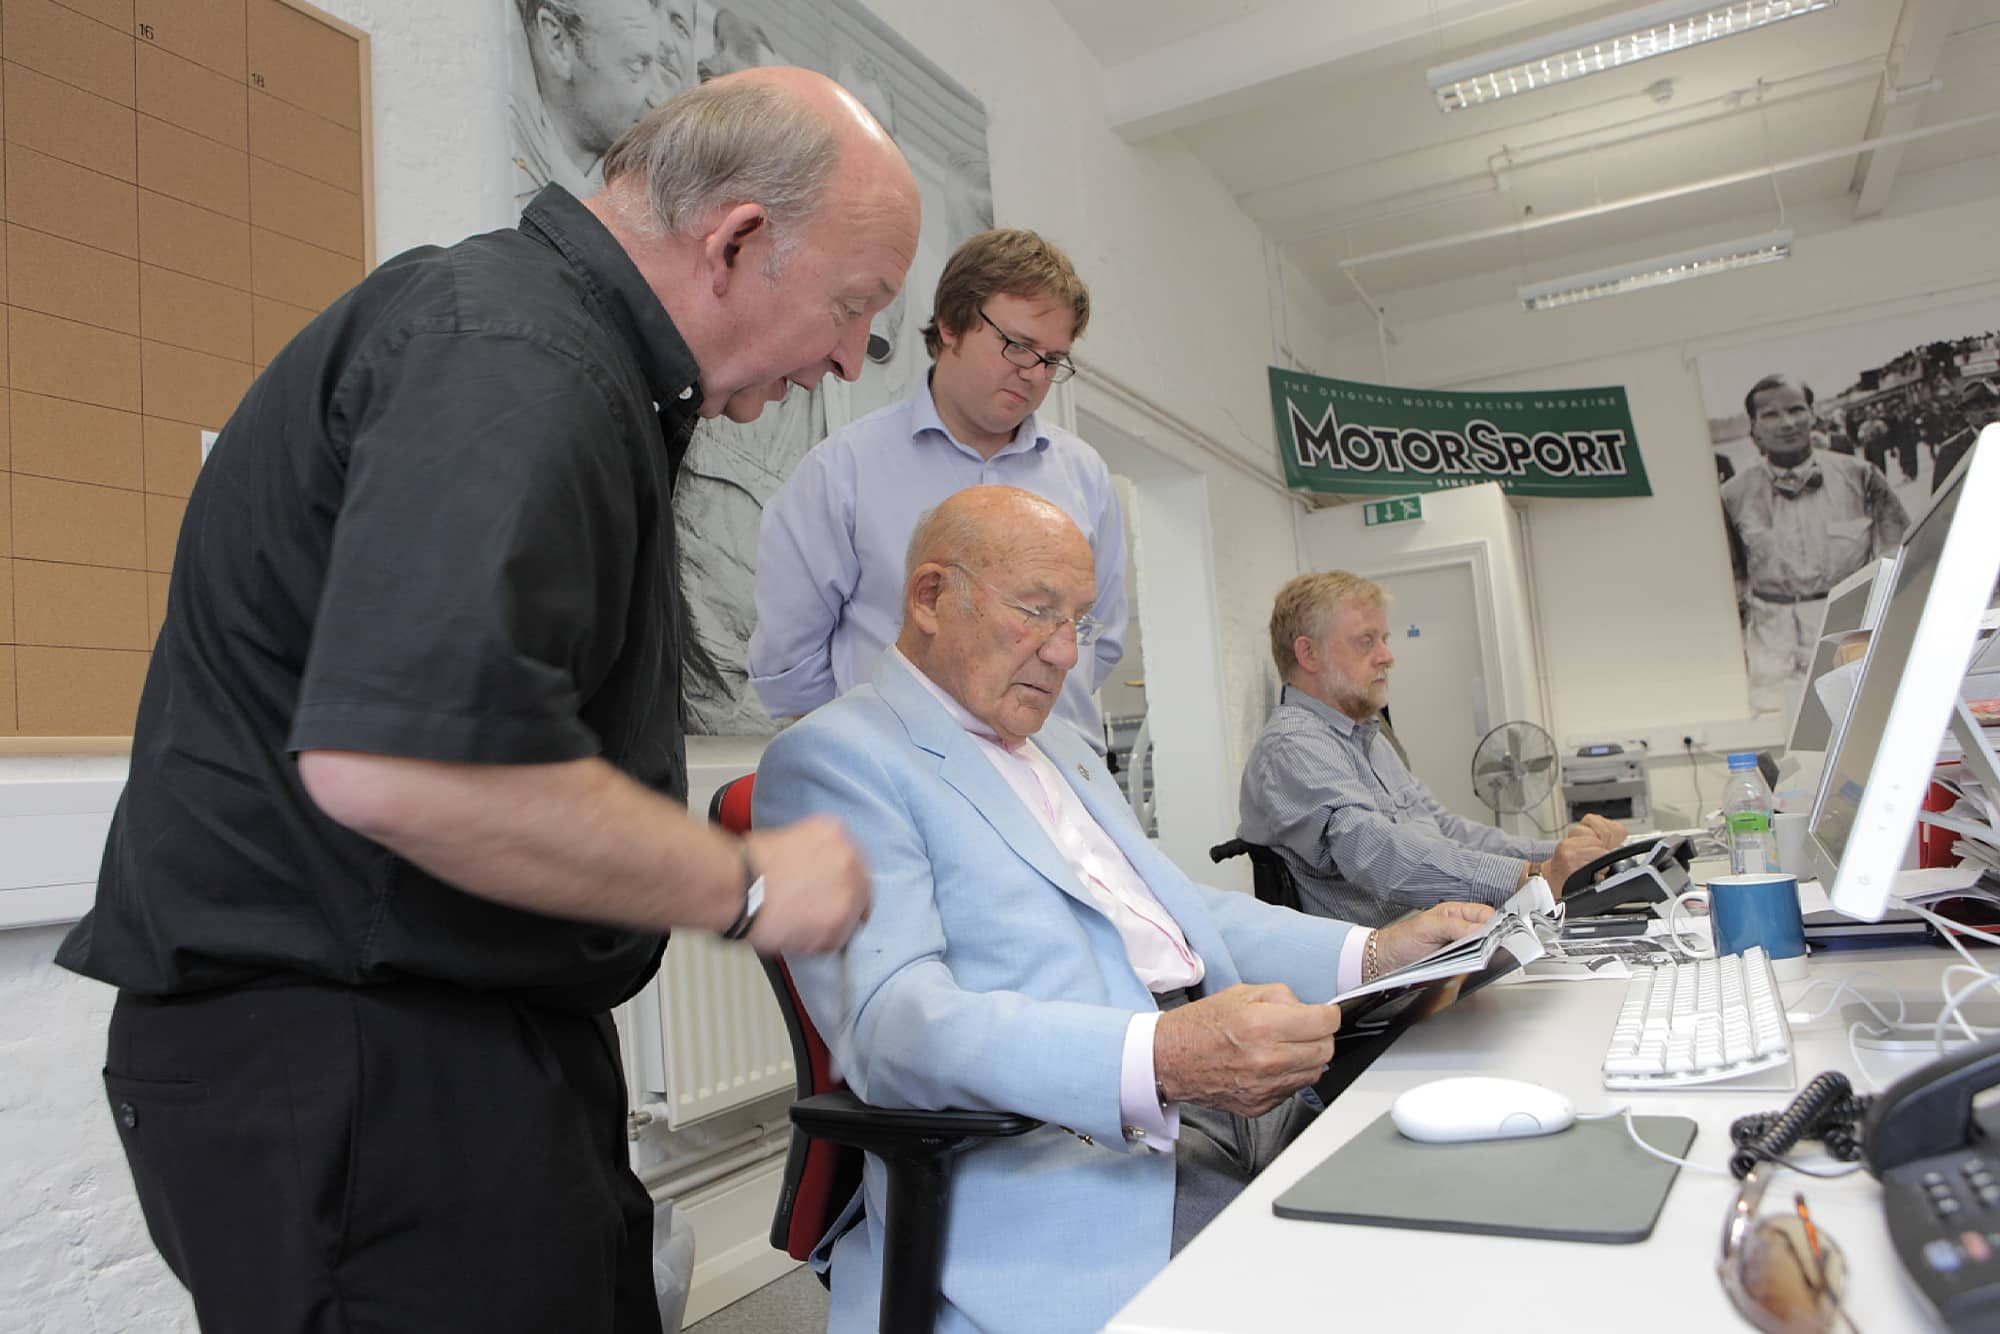 Stirling Moss in the Motor Sport editors chair